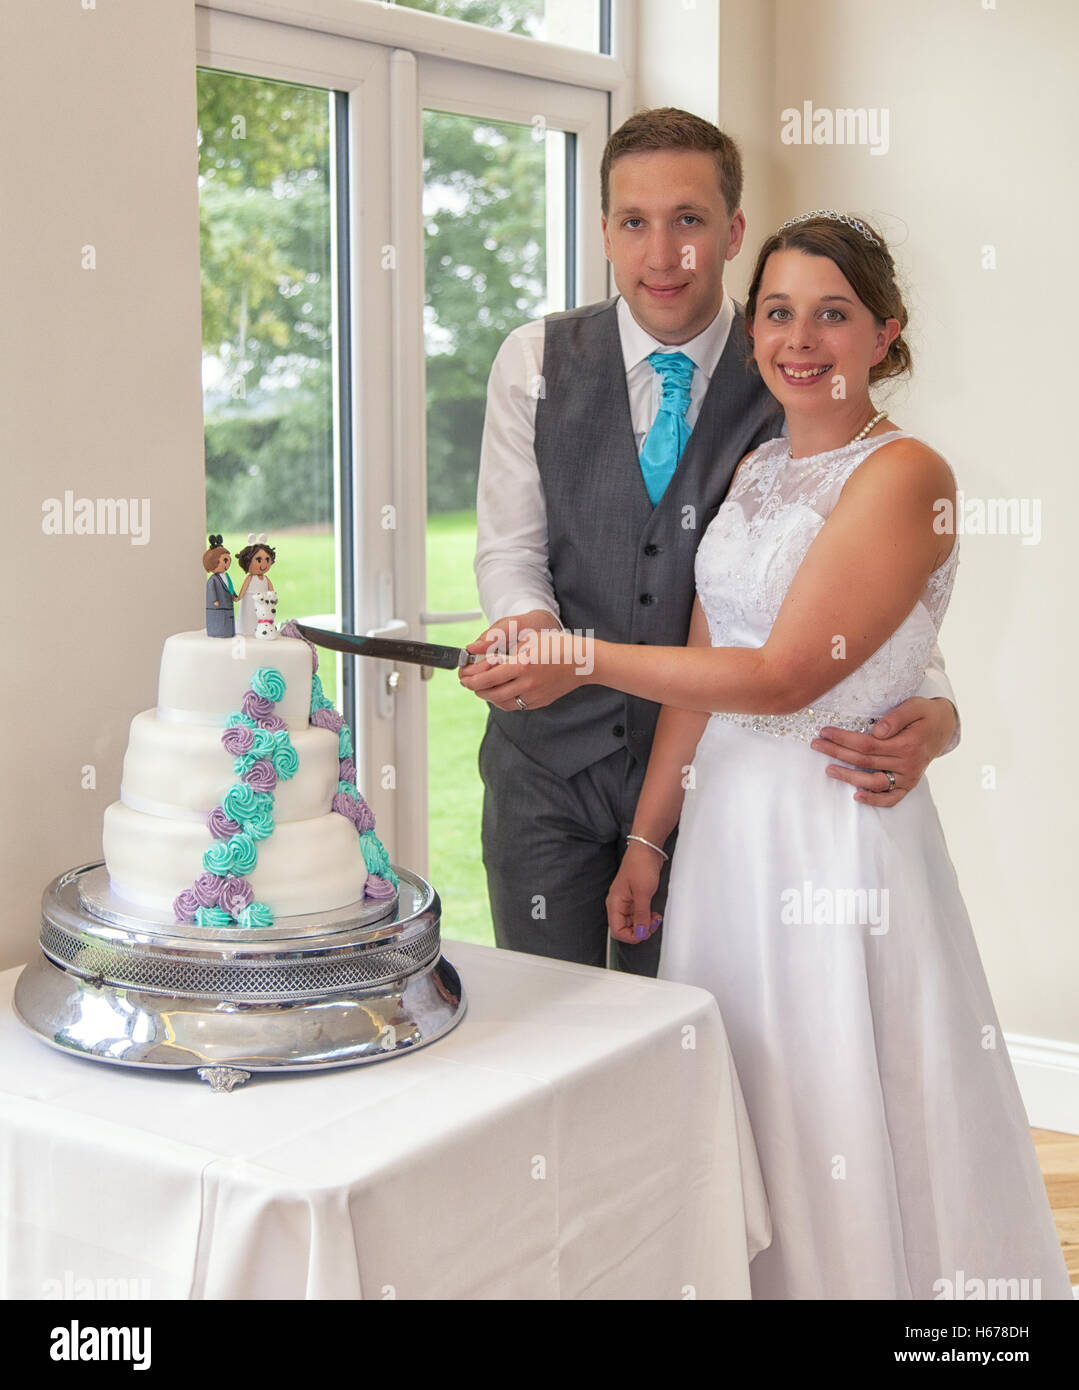 Bride and groom cutting their wedding cake on their wedding day Stock Photo